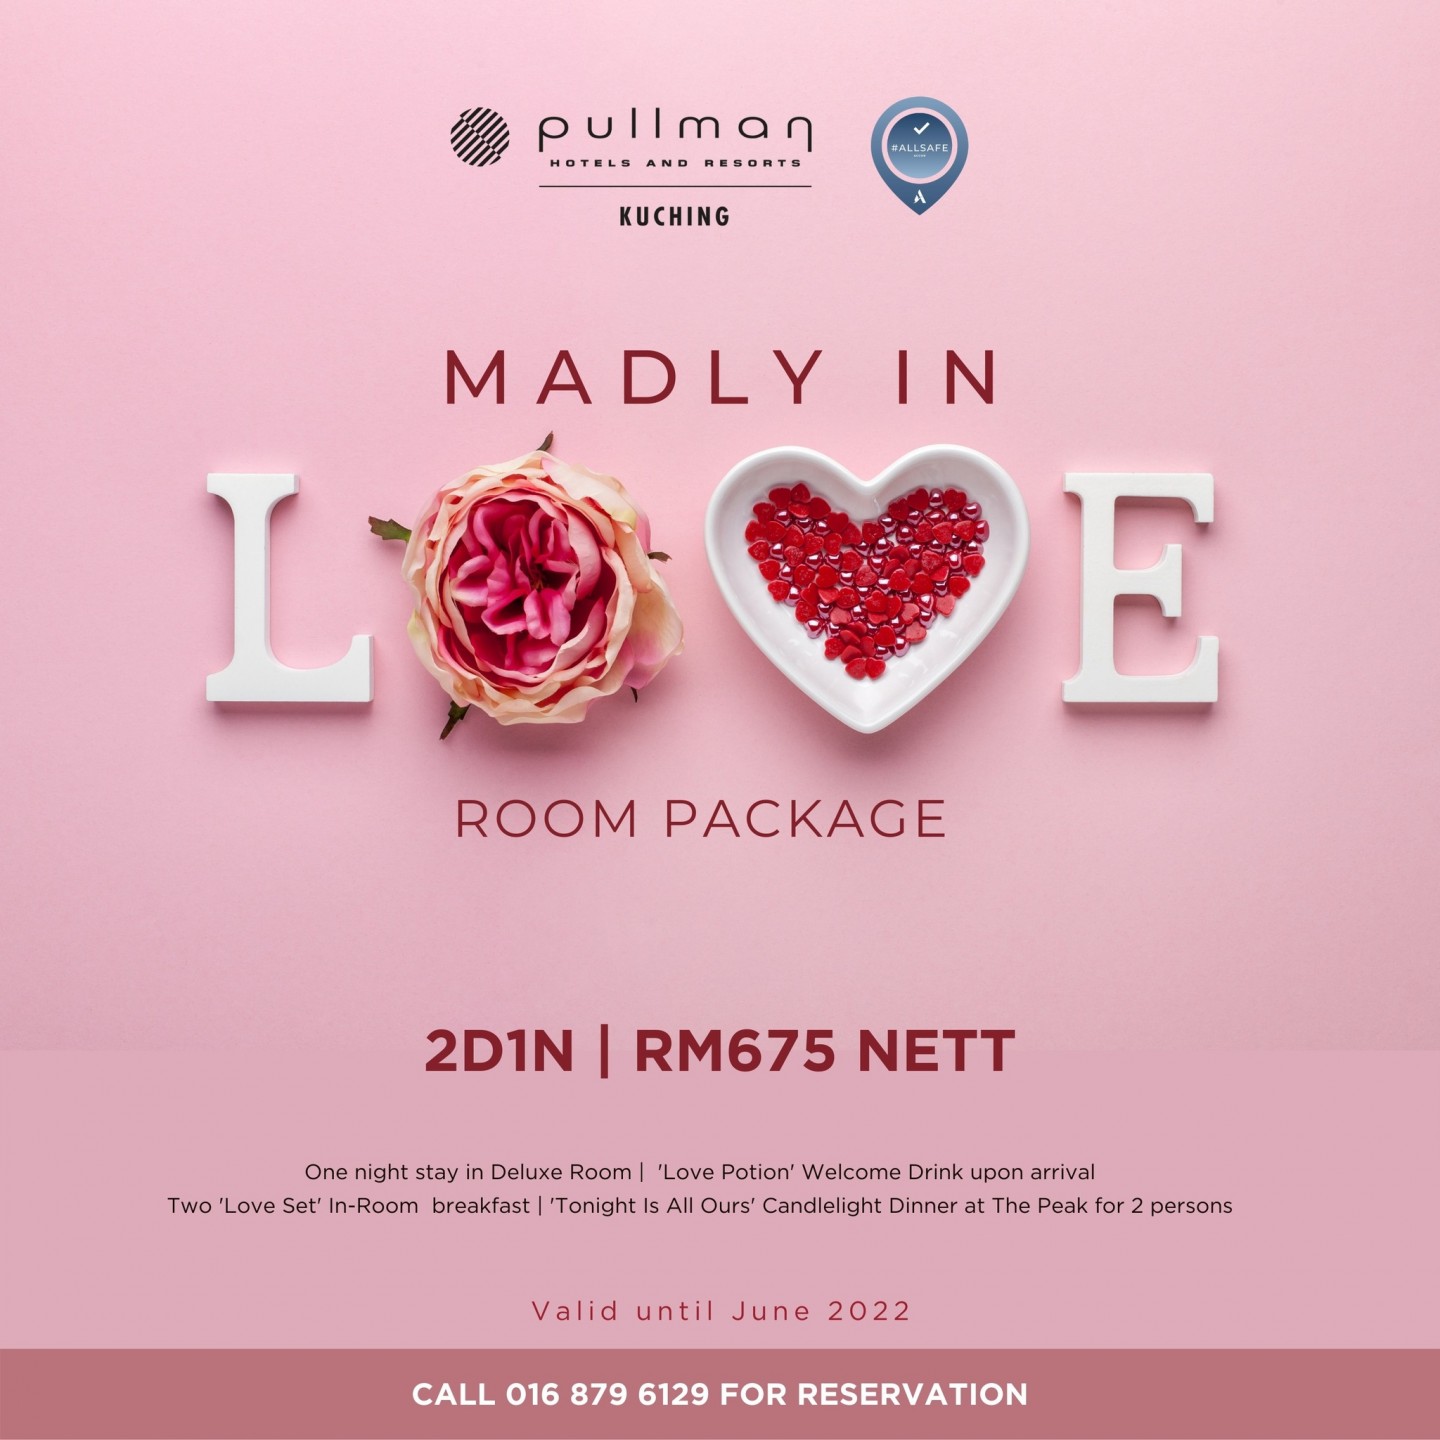 Madly In LOVE – Room Package